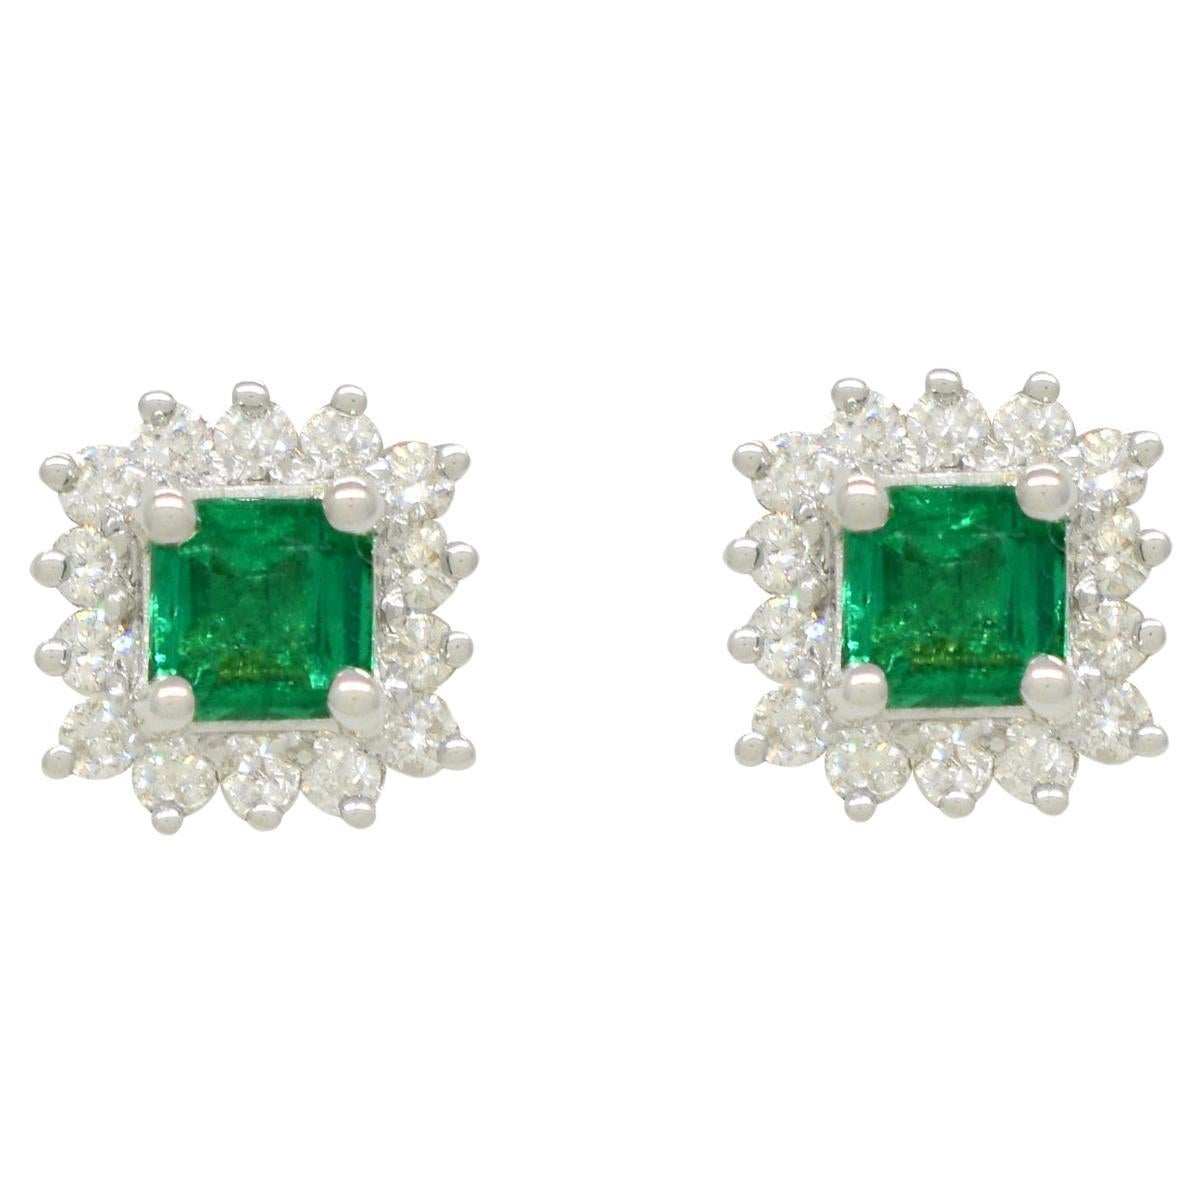 Small Emerald Cut Natural Colombian Emerald and Diamond Earrings Cluster Style For Sale